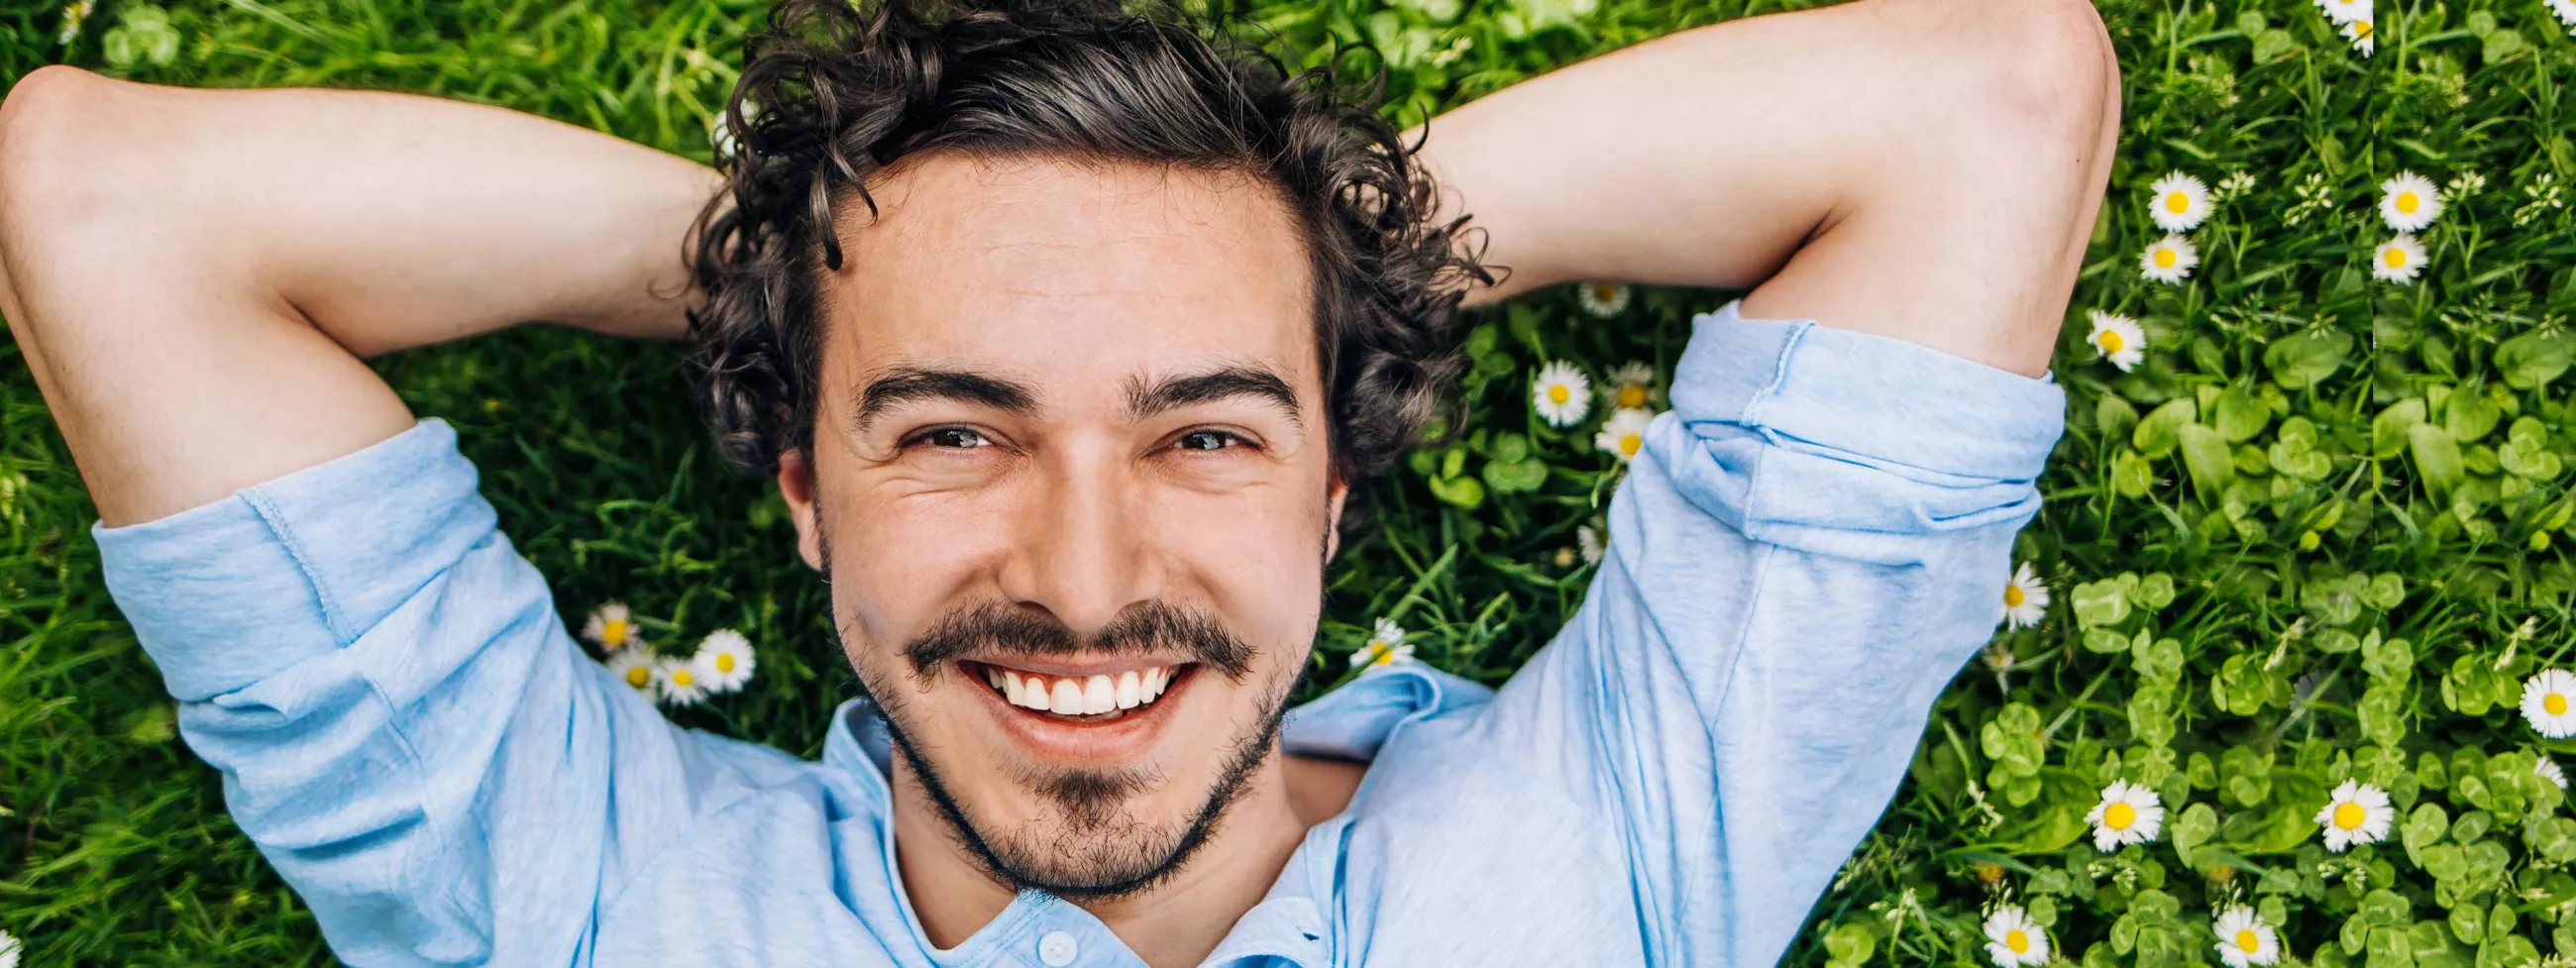 Man smiling and relaxing in the grass